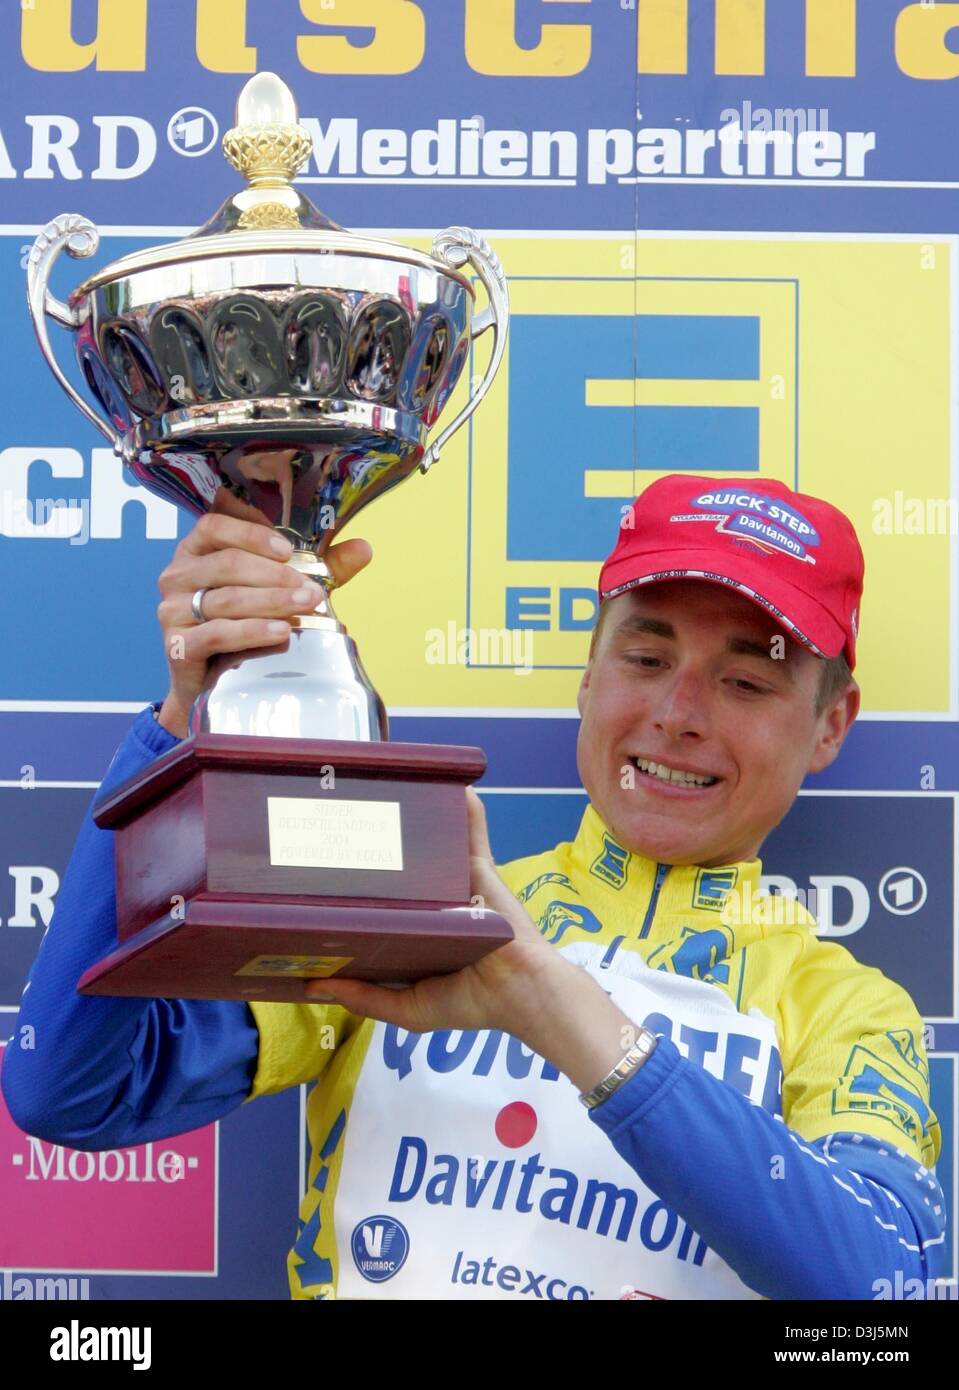 (dpa) - The 23-year old cycling pro Patrik Sinkewitz of Team Quick-Step Davitamon smiles and poses with his trophy after winning the Tour of Germany cycling race in Leipzig, Germany, 6 June 2004, which marks his biggest victory as yet. Stock Photo